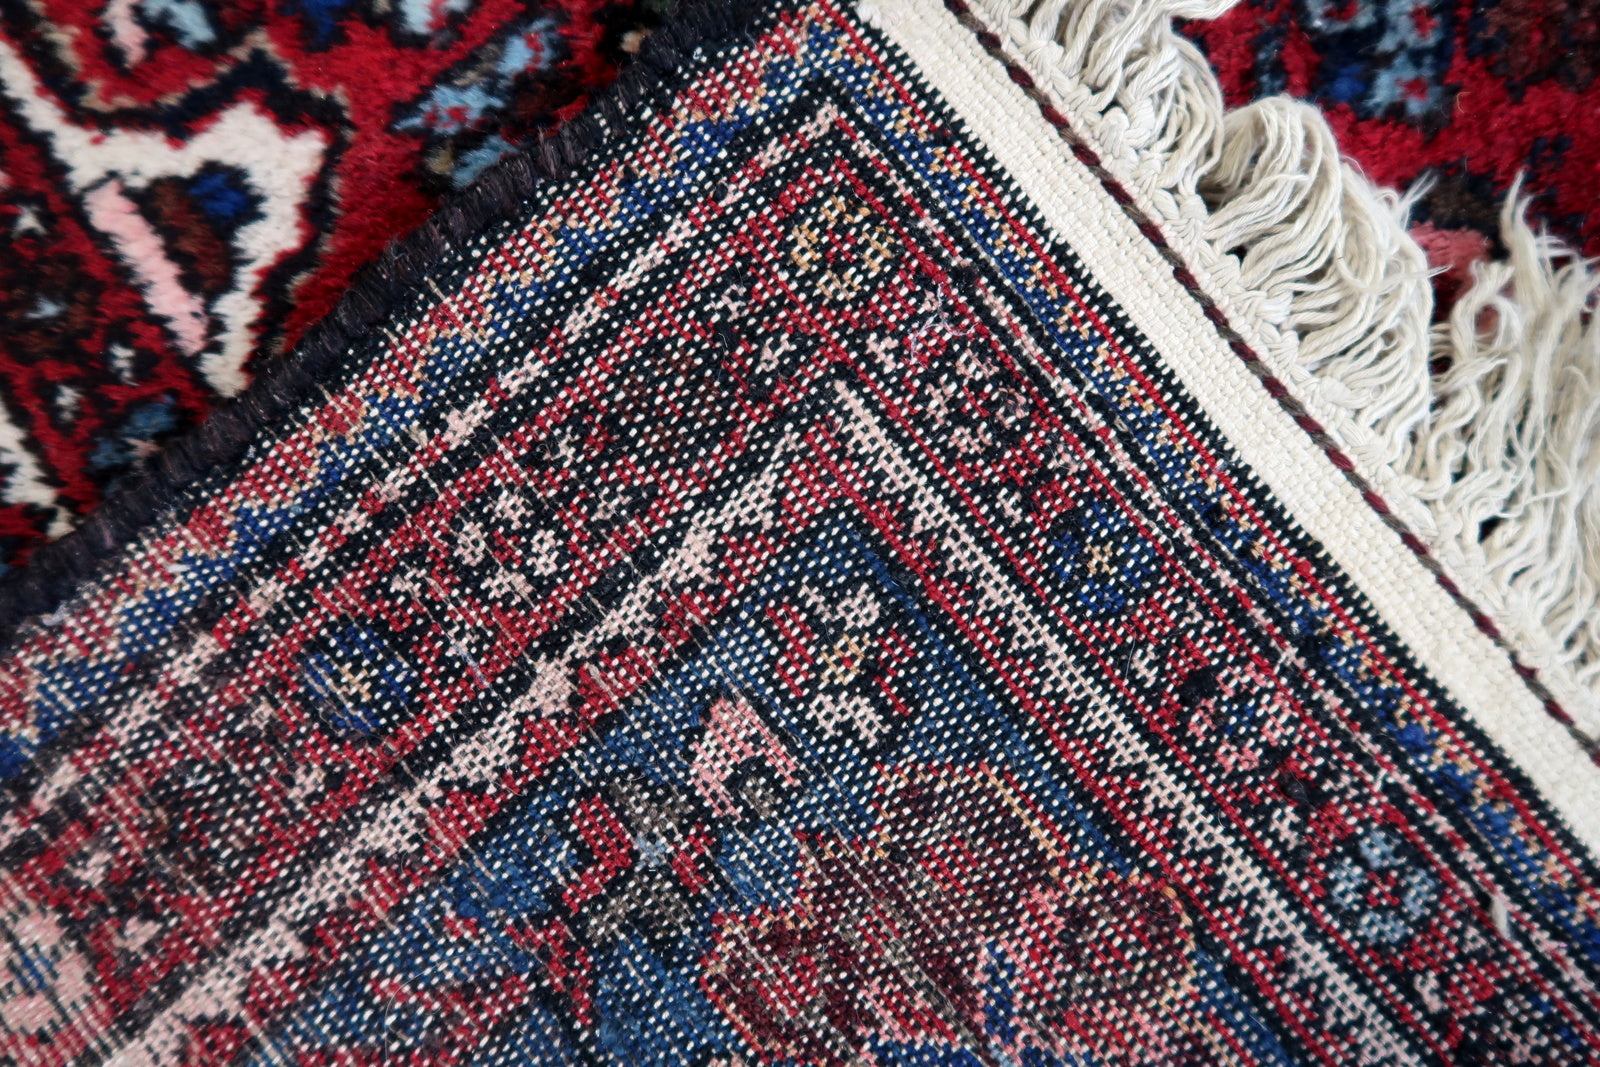 Back side of the Handmade Vintage Persian Malayer Rug - Underside view revealing the rug's construction and material.